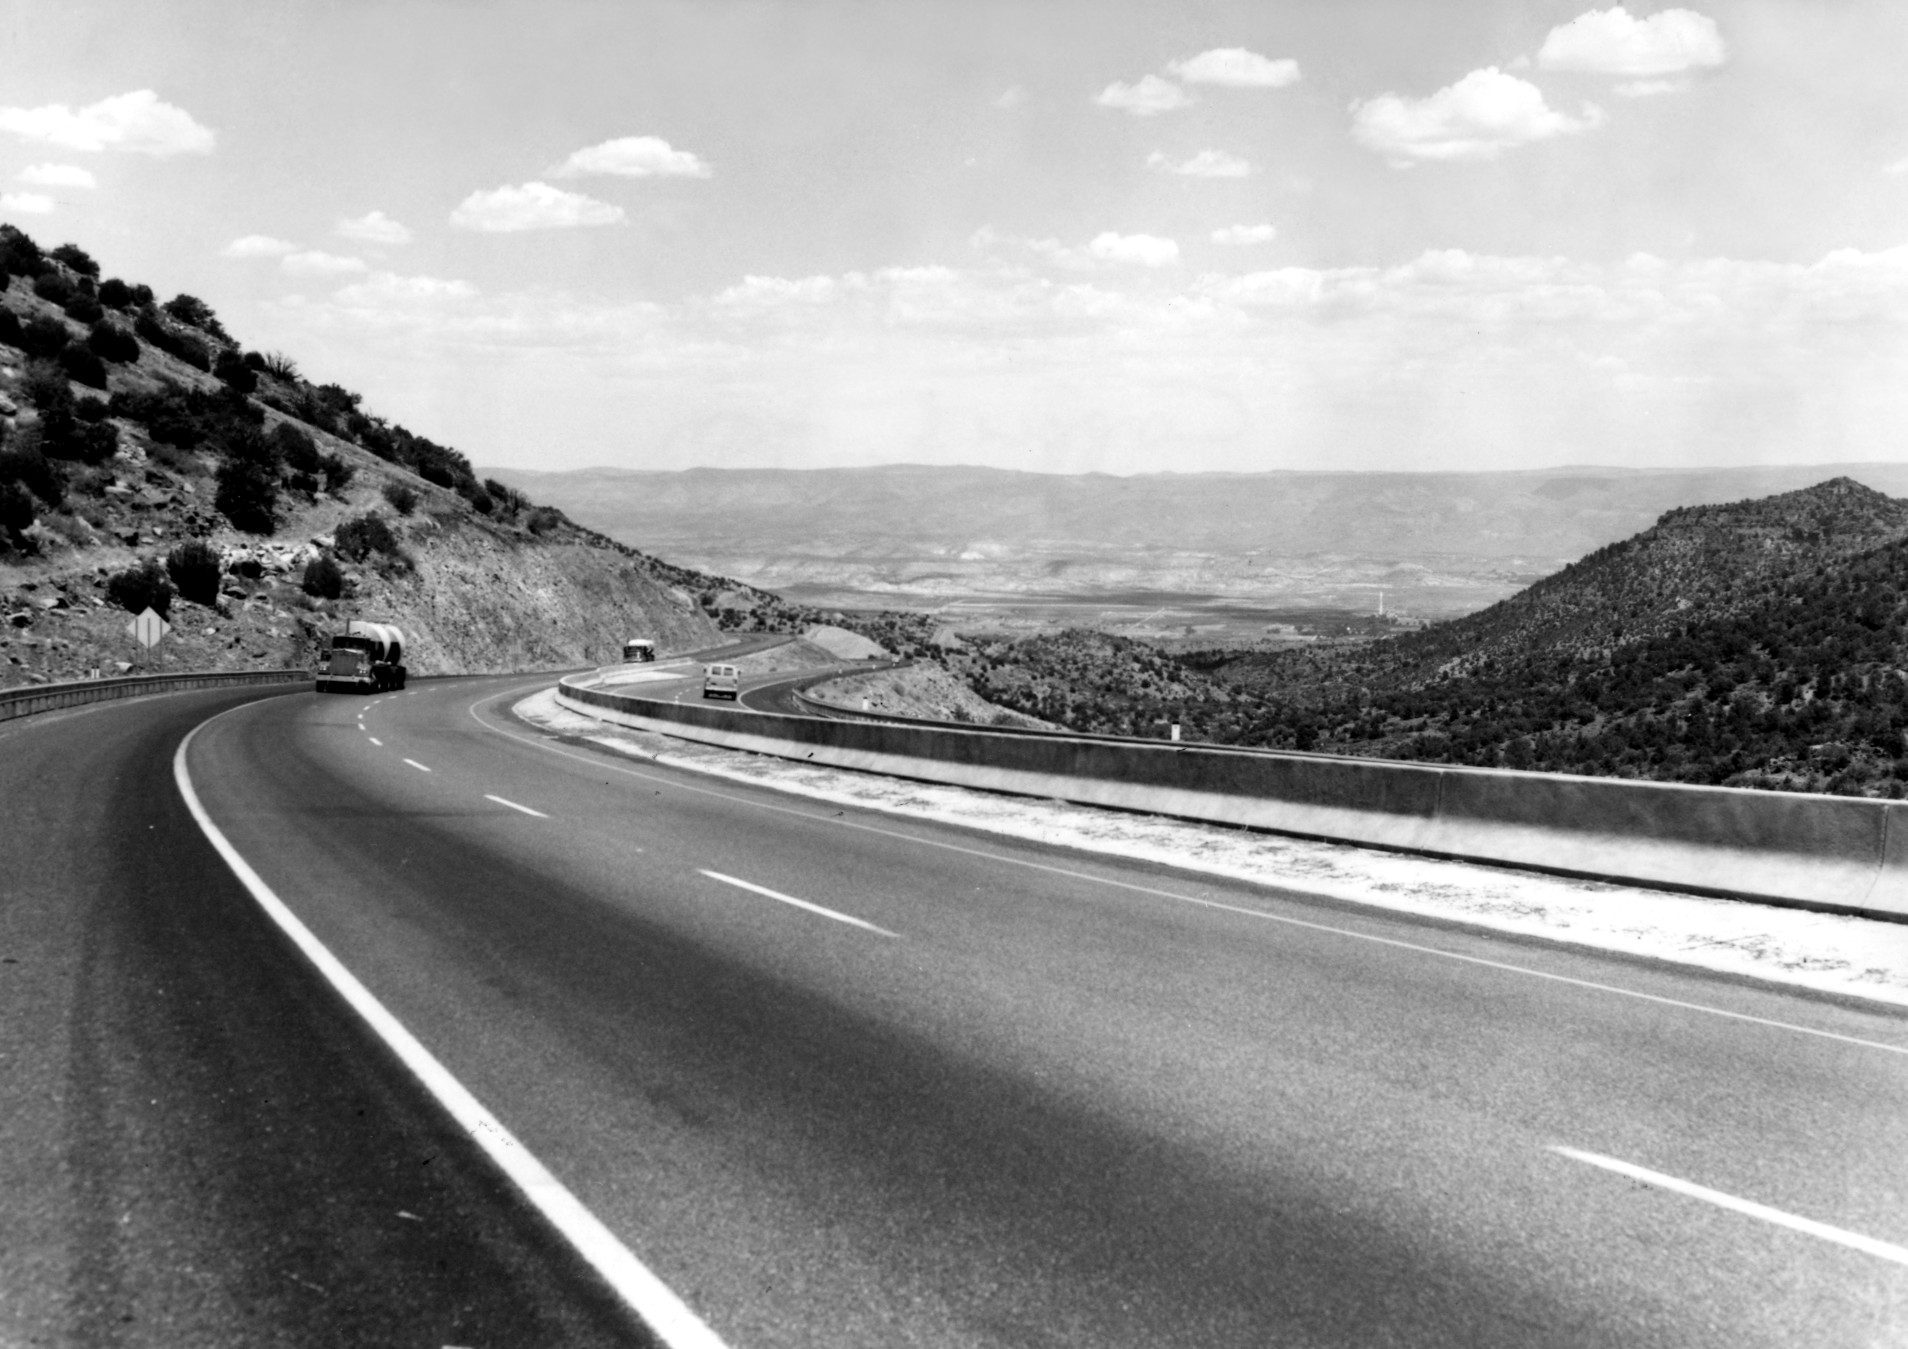 I-17 at Copper Canyon undated